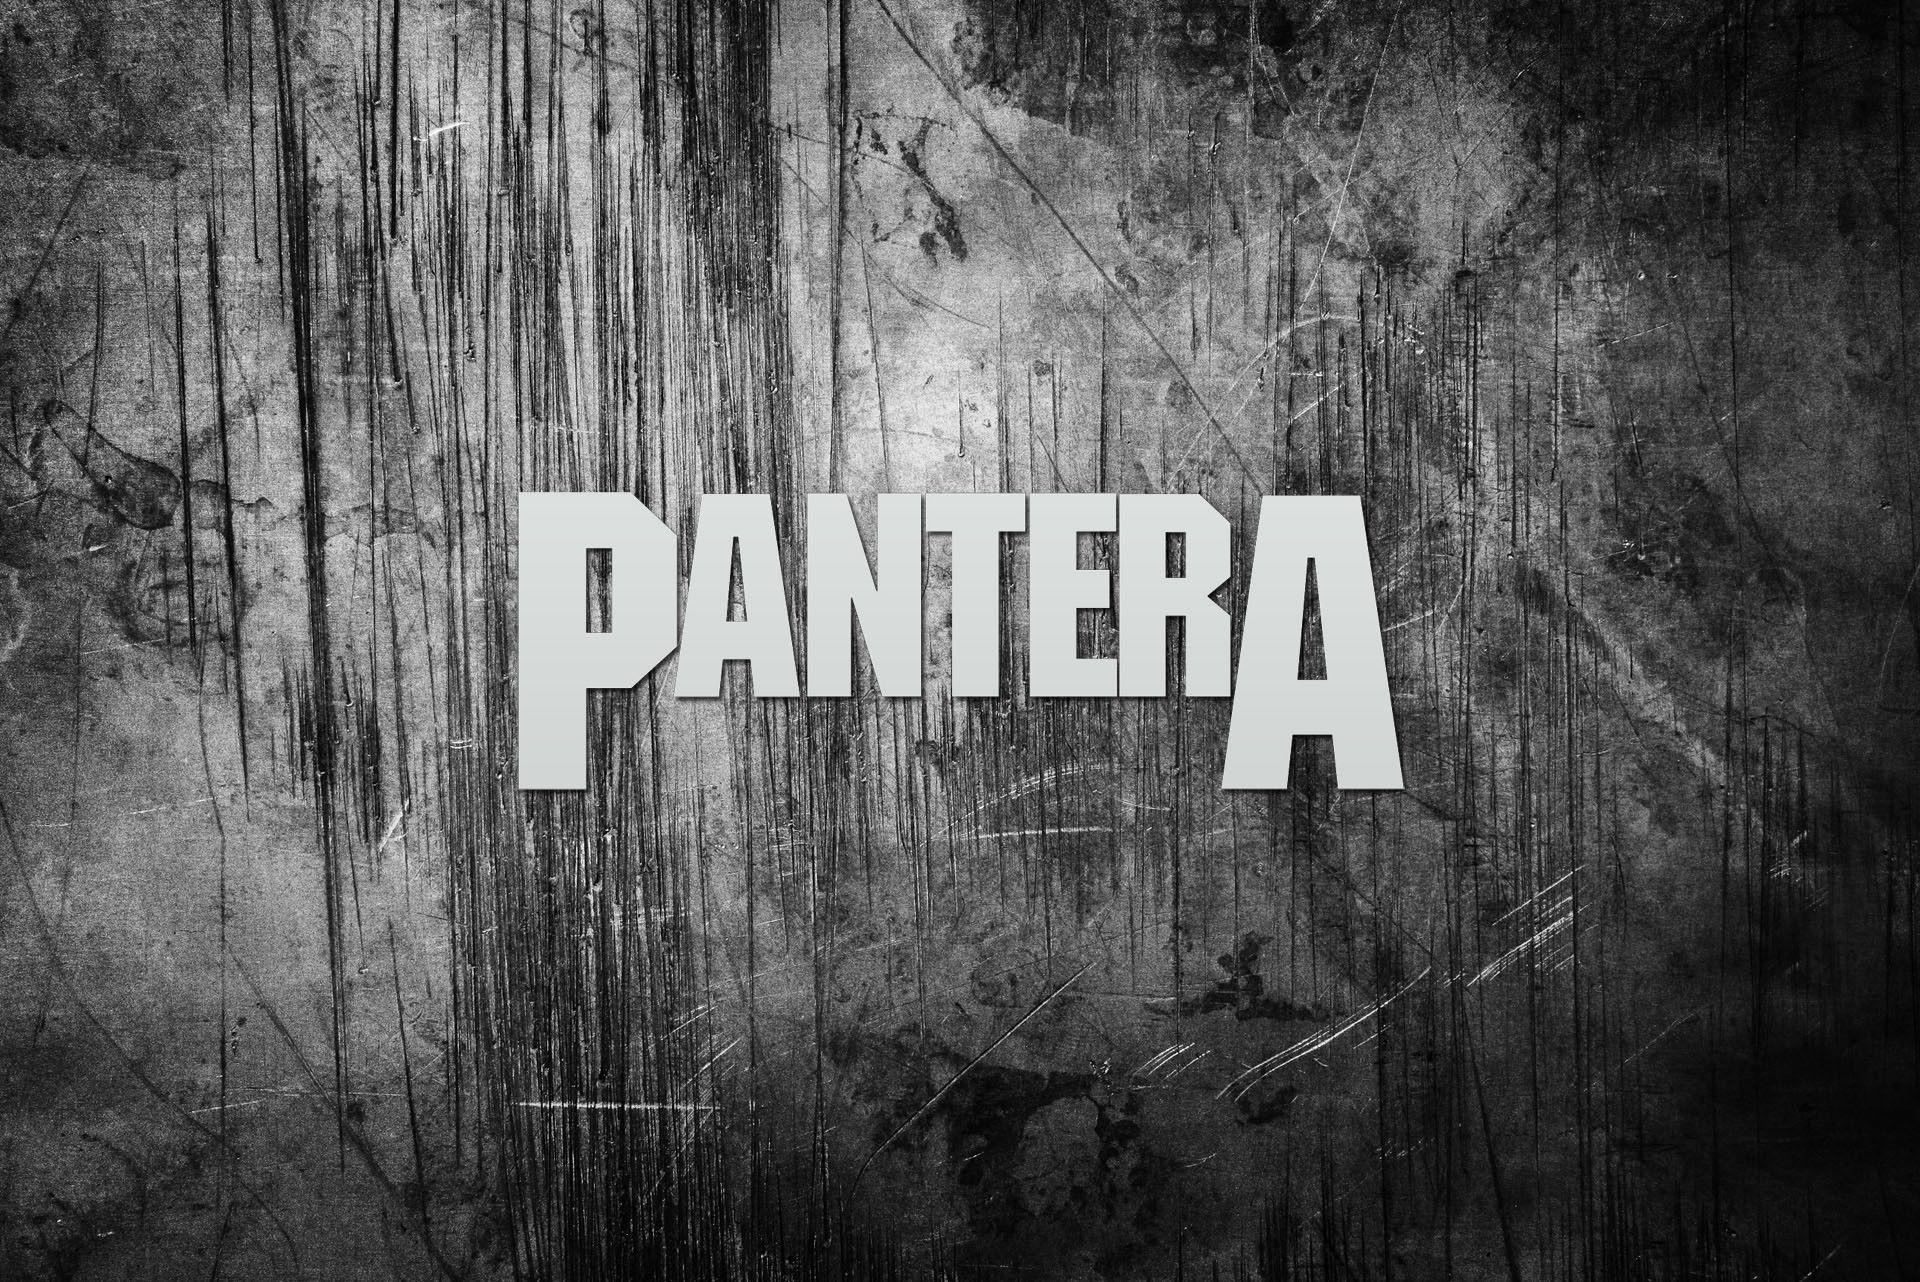 Android Wallpaper Pantera posted by Kristine Richard  Pantera Band  wallpapers Android wallpaper